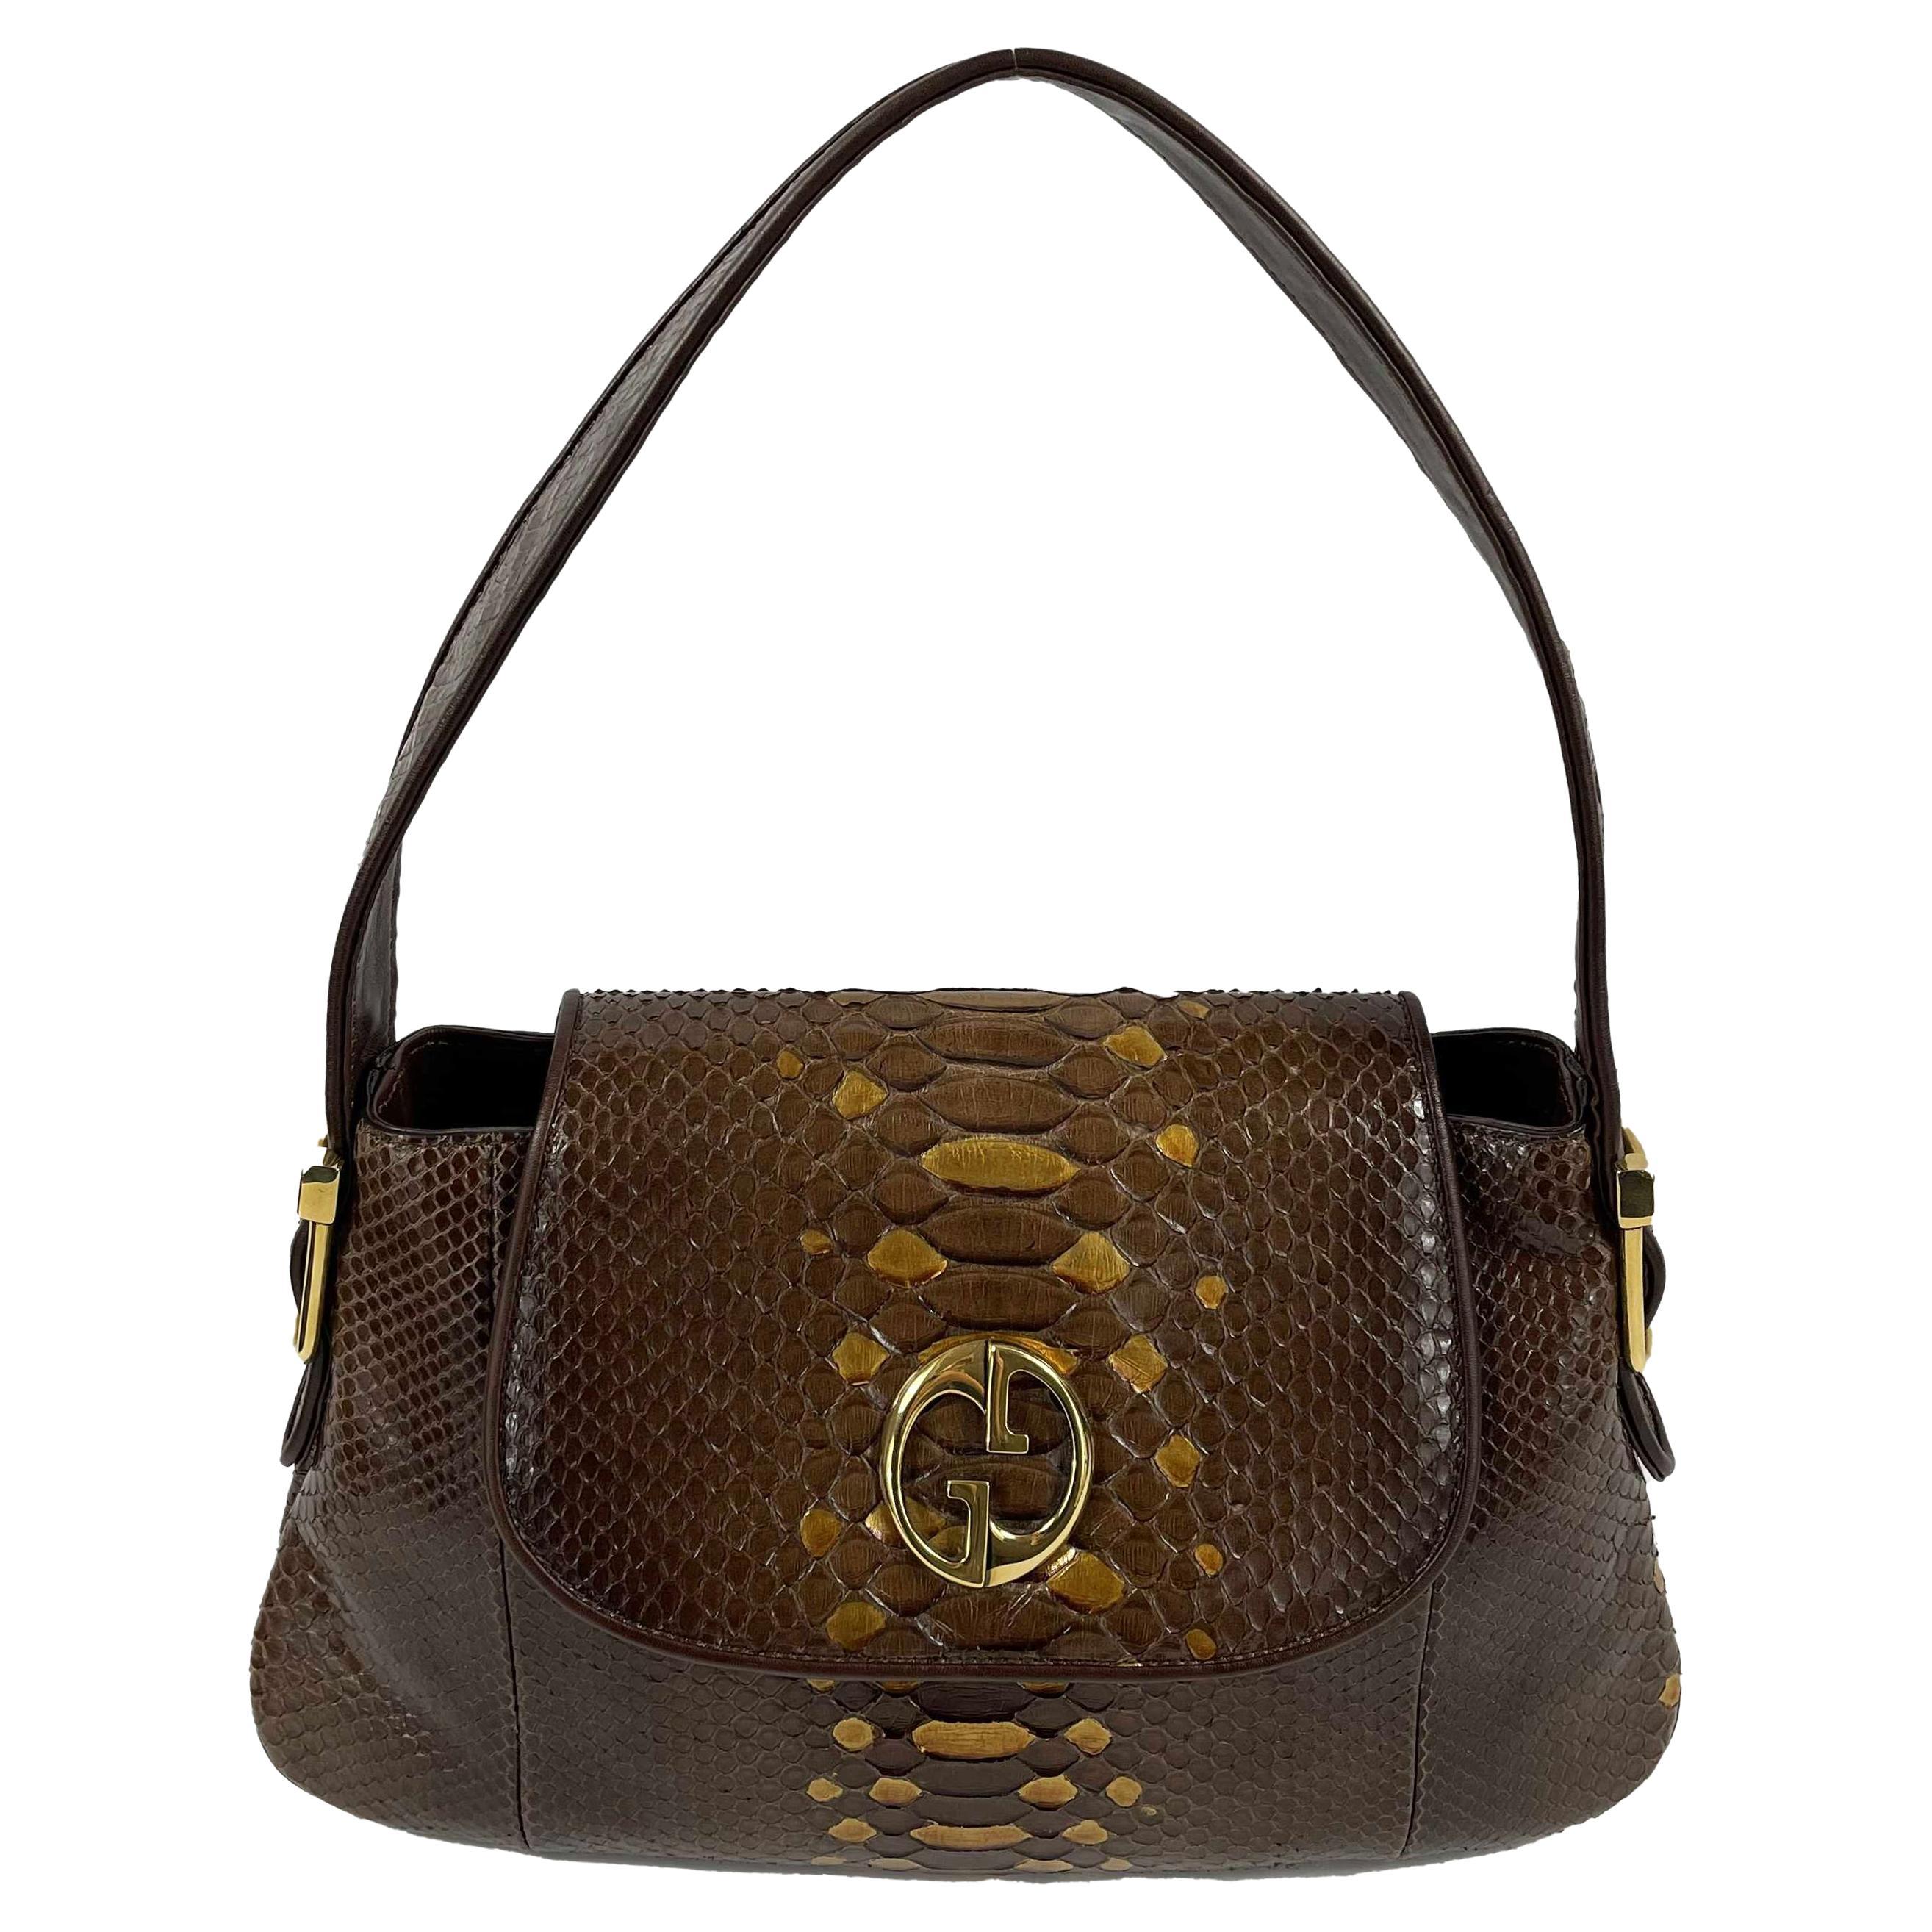 Gucci 1973 - 9 For Sale on 1stDibs | gucci 1973 bag, gucci 1973 